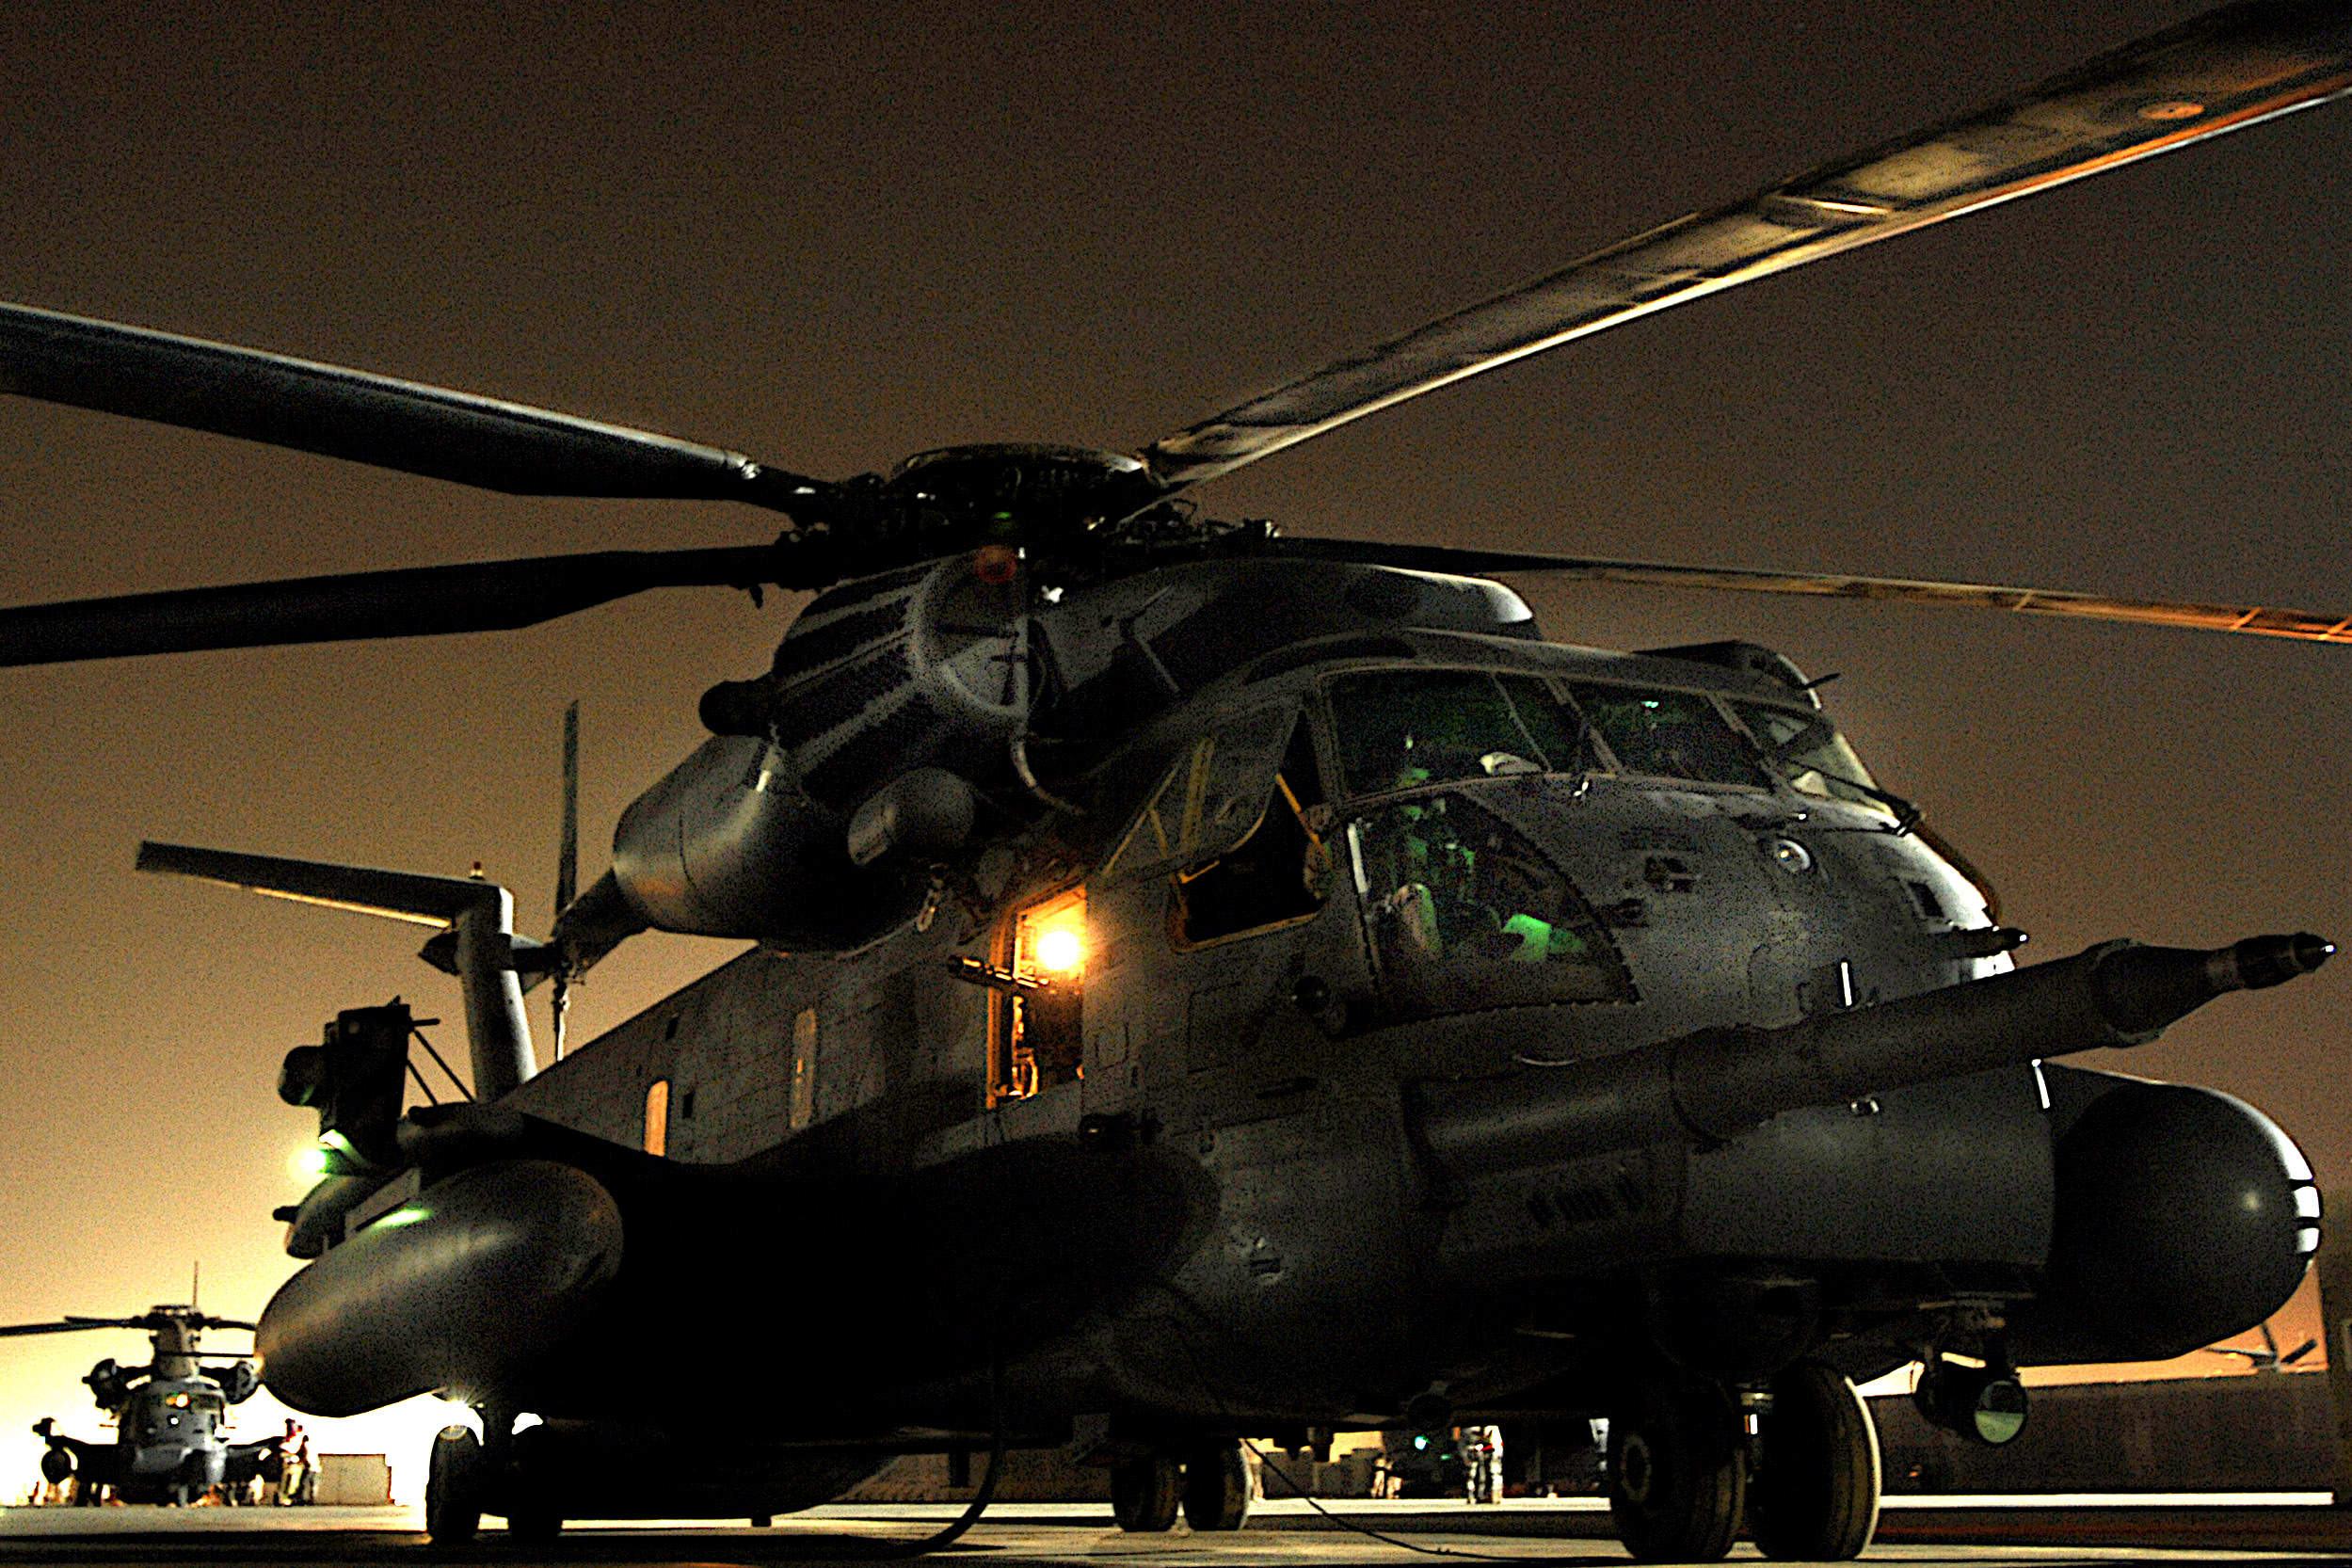 aircraft, helicopters, vehicles - desktop wallpaper